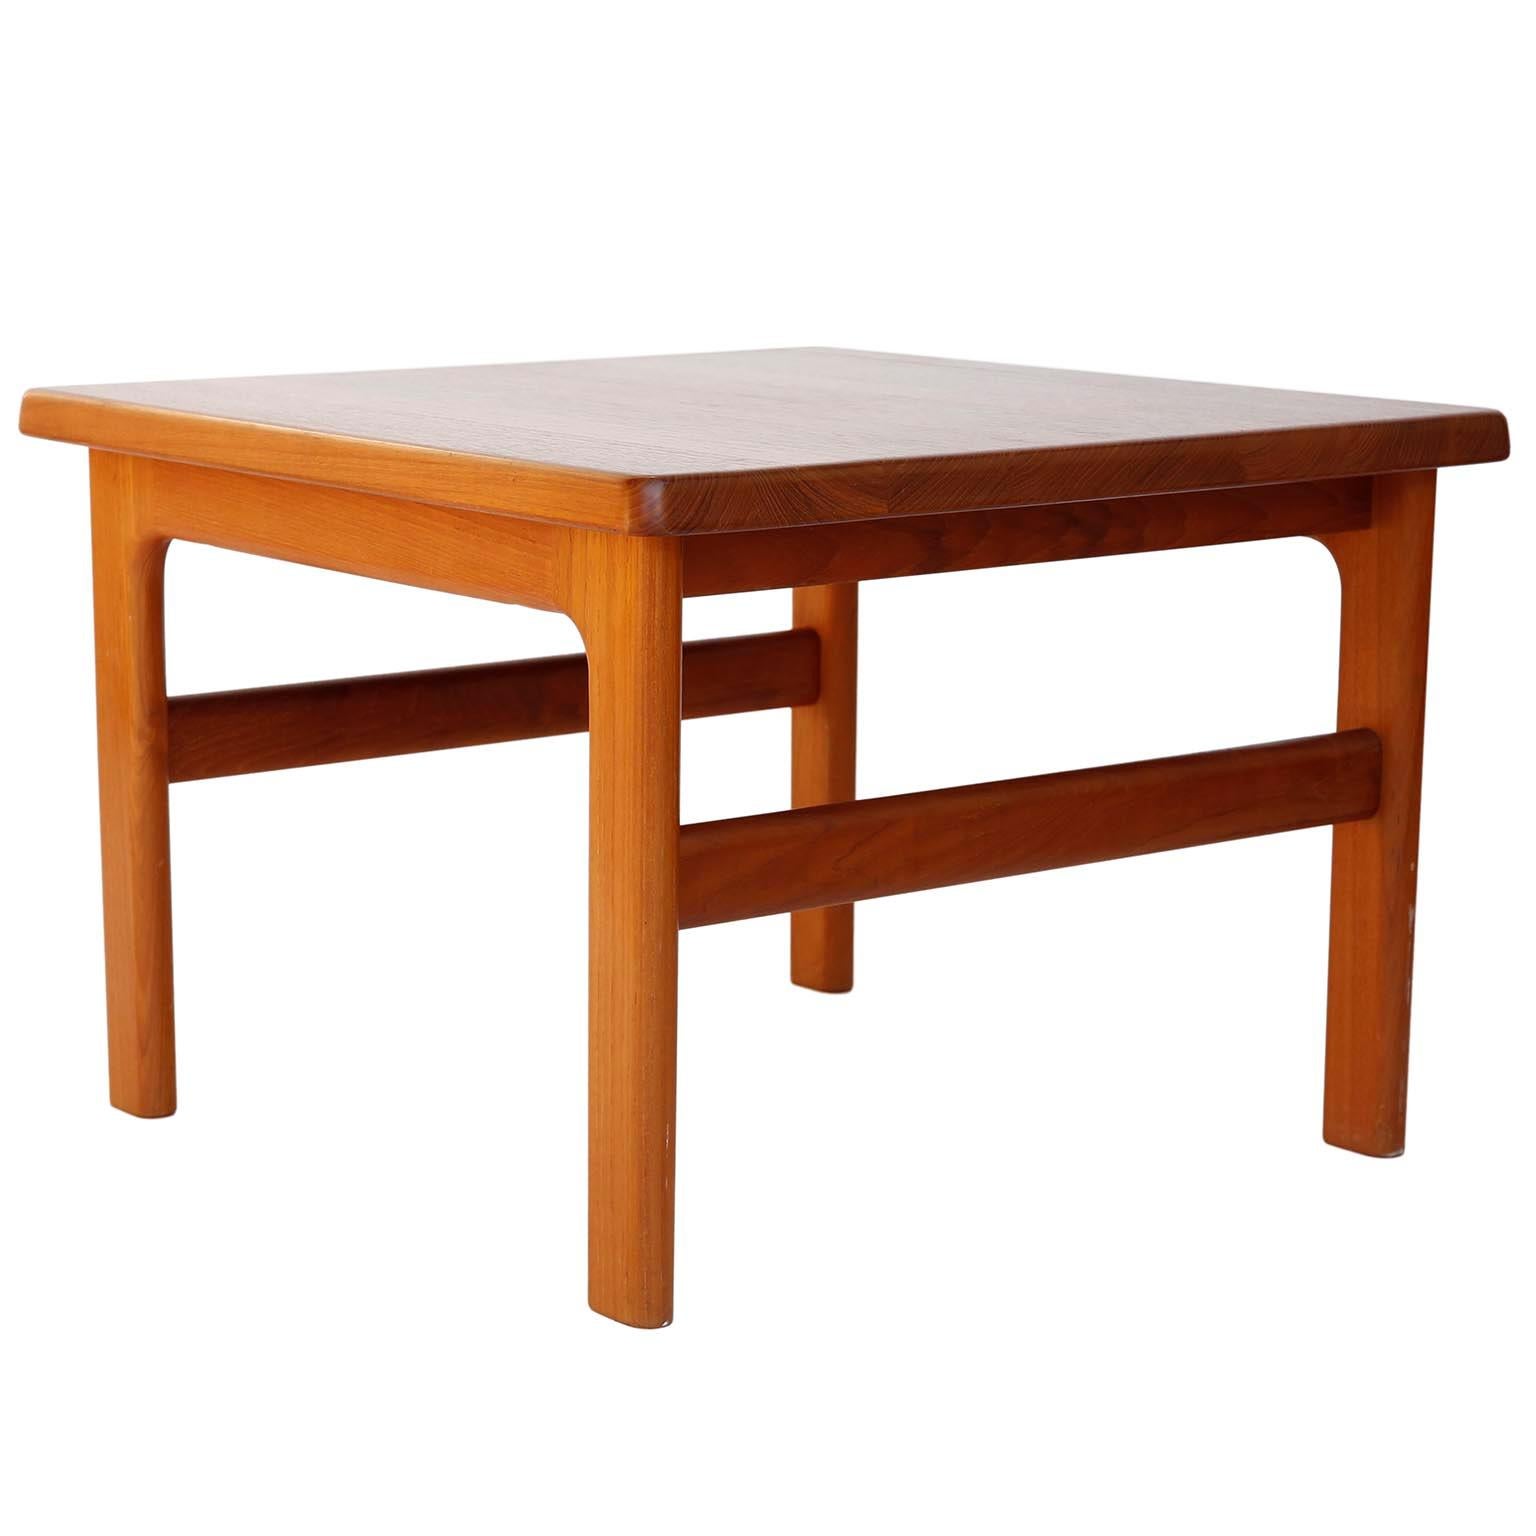 A square coffee table in a warm toned teak wood designed by Niels Bach, Denmark, manufactured in midcentury, circa 1960 (late 1950s or early 1960s).
A great example of an organic shaped and simple and timeless designed Danish or Scandinavian Modern